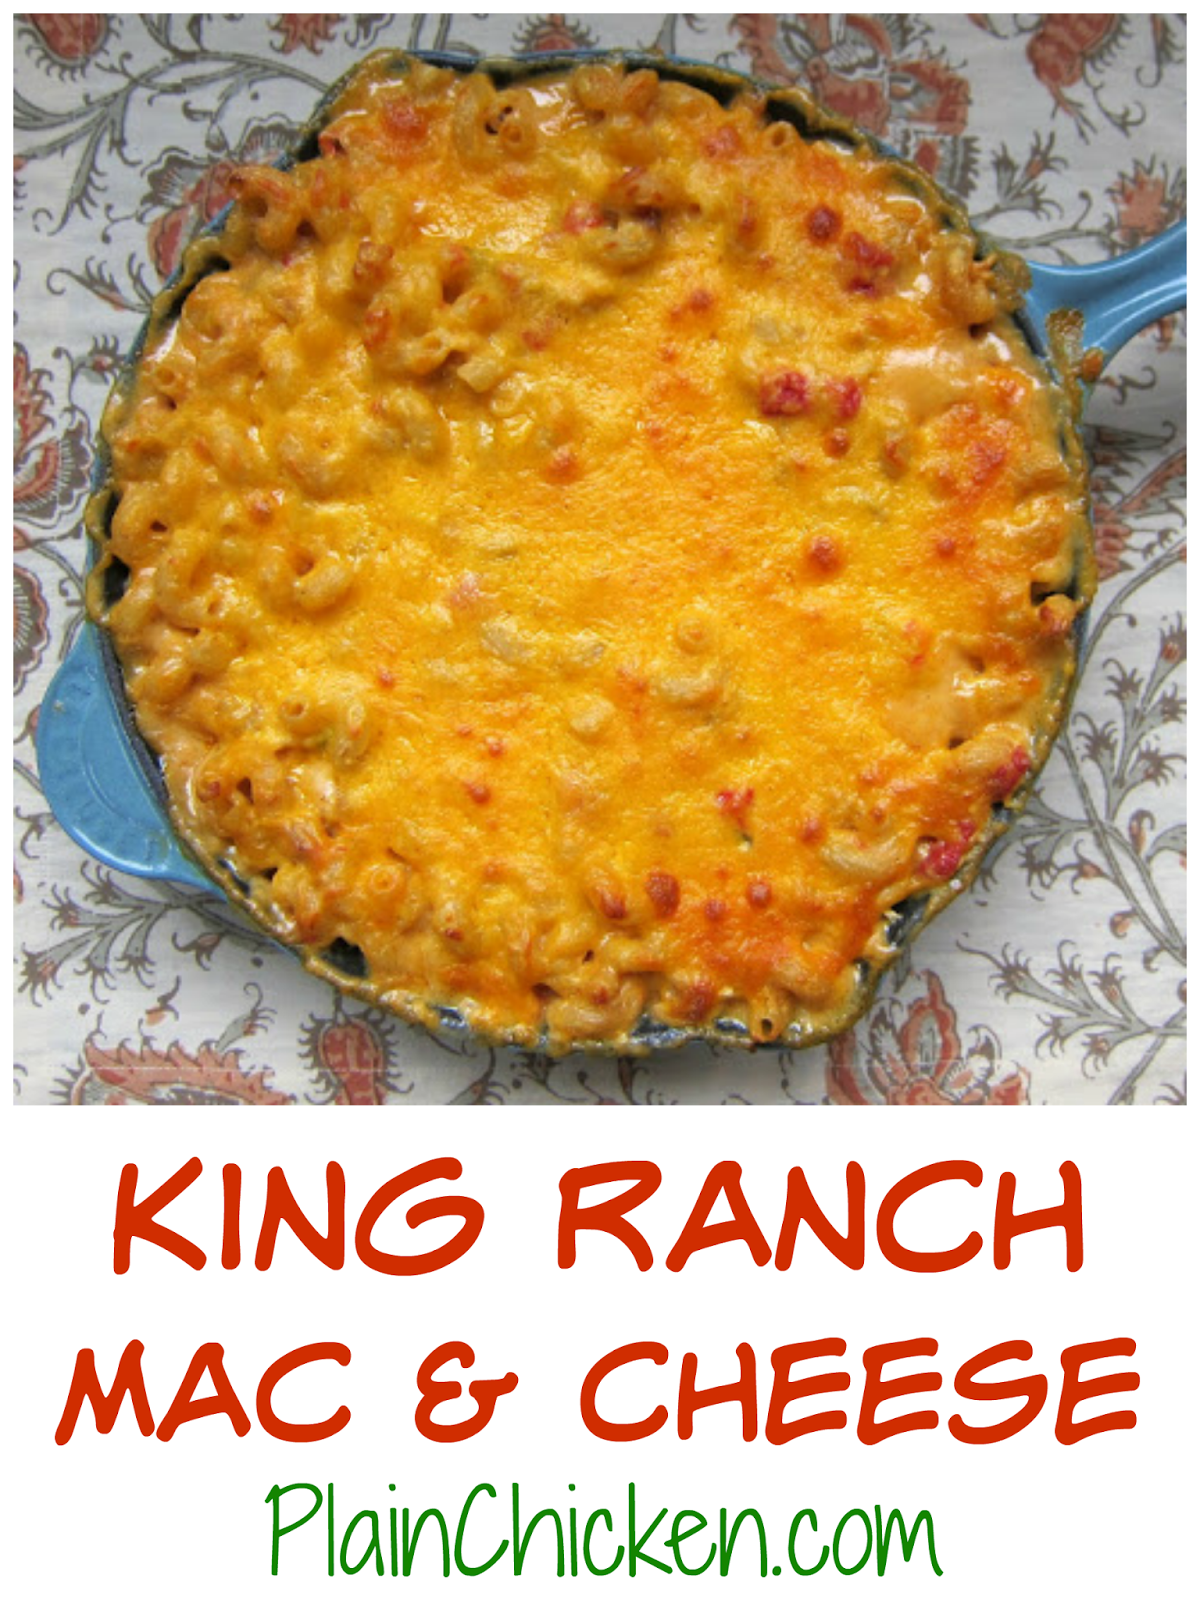 King Ranch Mac and Cheese Recipe- best dish ever! Pasta, chicken, chicken soup, sour cream, Velveeta, cheddar and Rotel - so addictive! He asked me to make it again, twice, while we were still eating it!